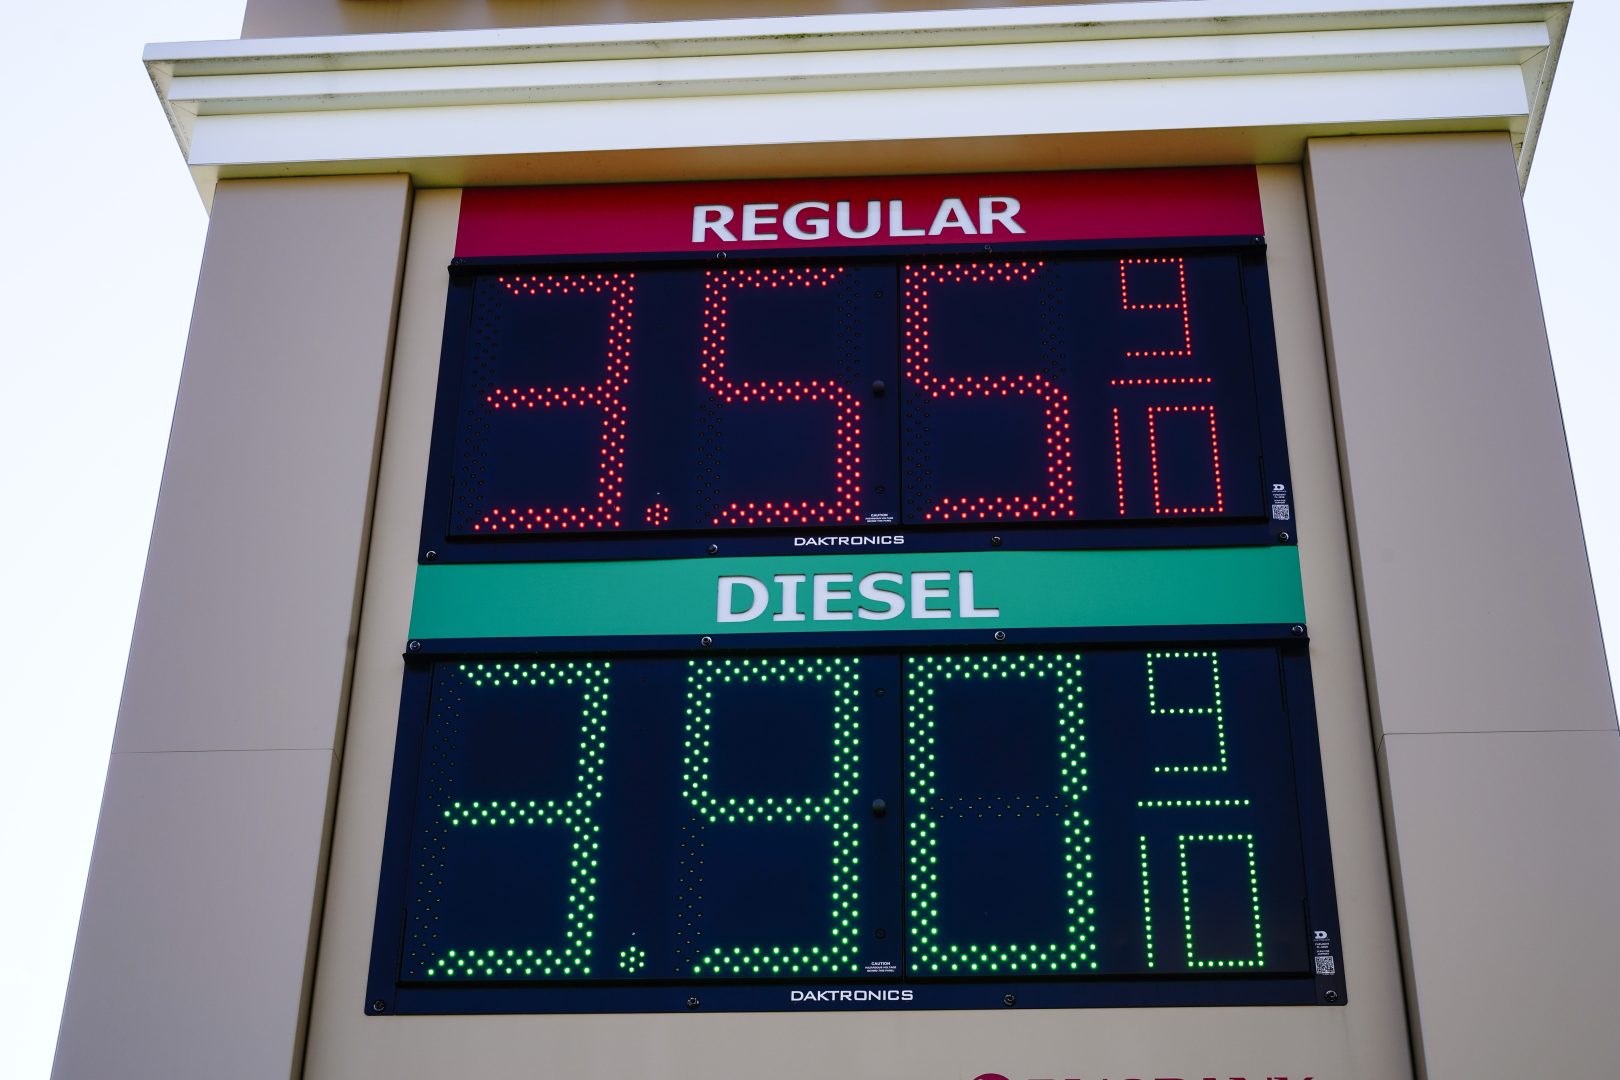 Fuel prices are posted at a filling station in Willow Grove, Pa., Tuesday, Nov. 23, 2021. The White House on Tuesday said it had ordered 50 million barrels of oil released from strategic reserve to bring down energy costs.